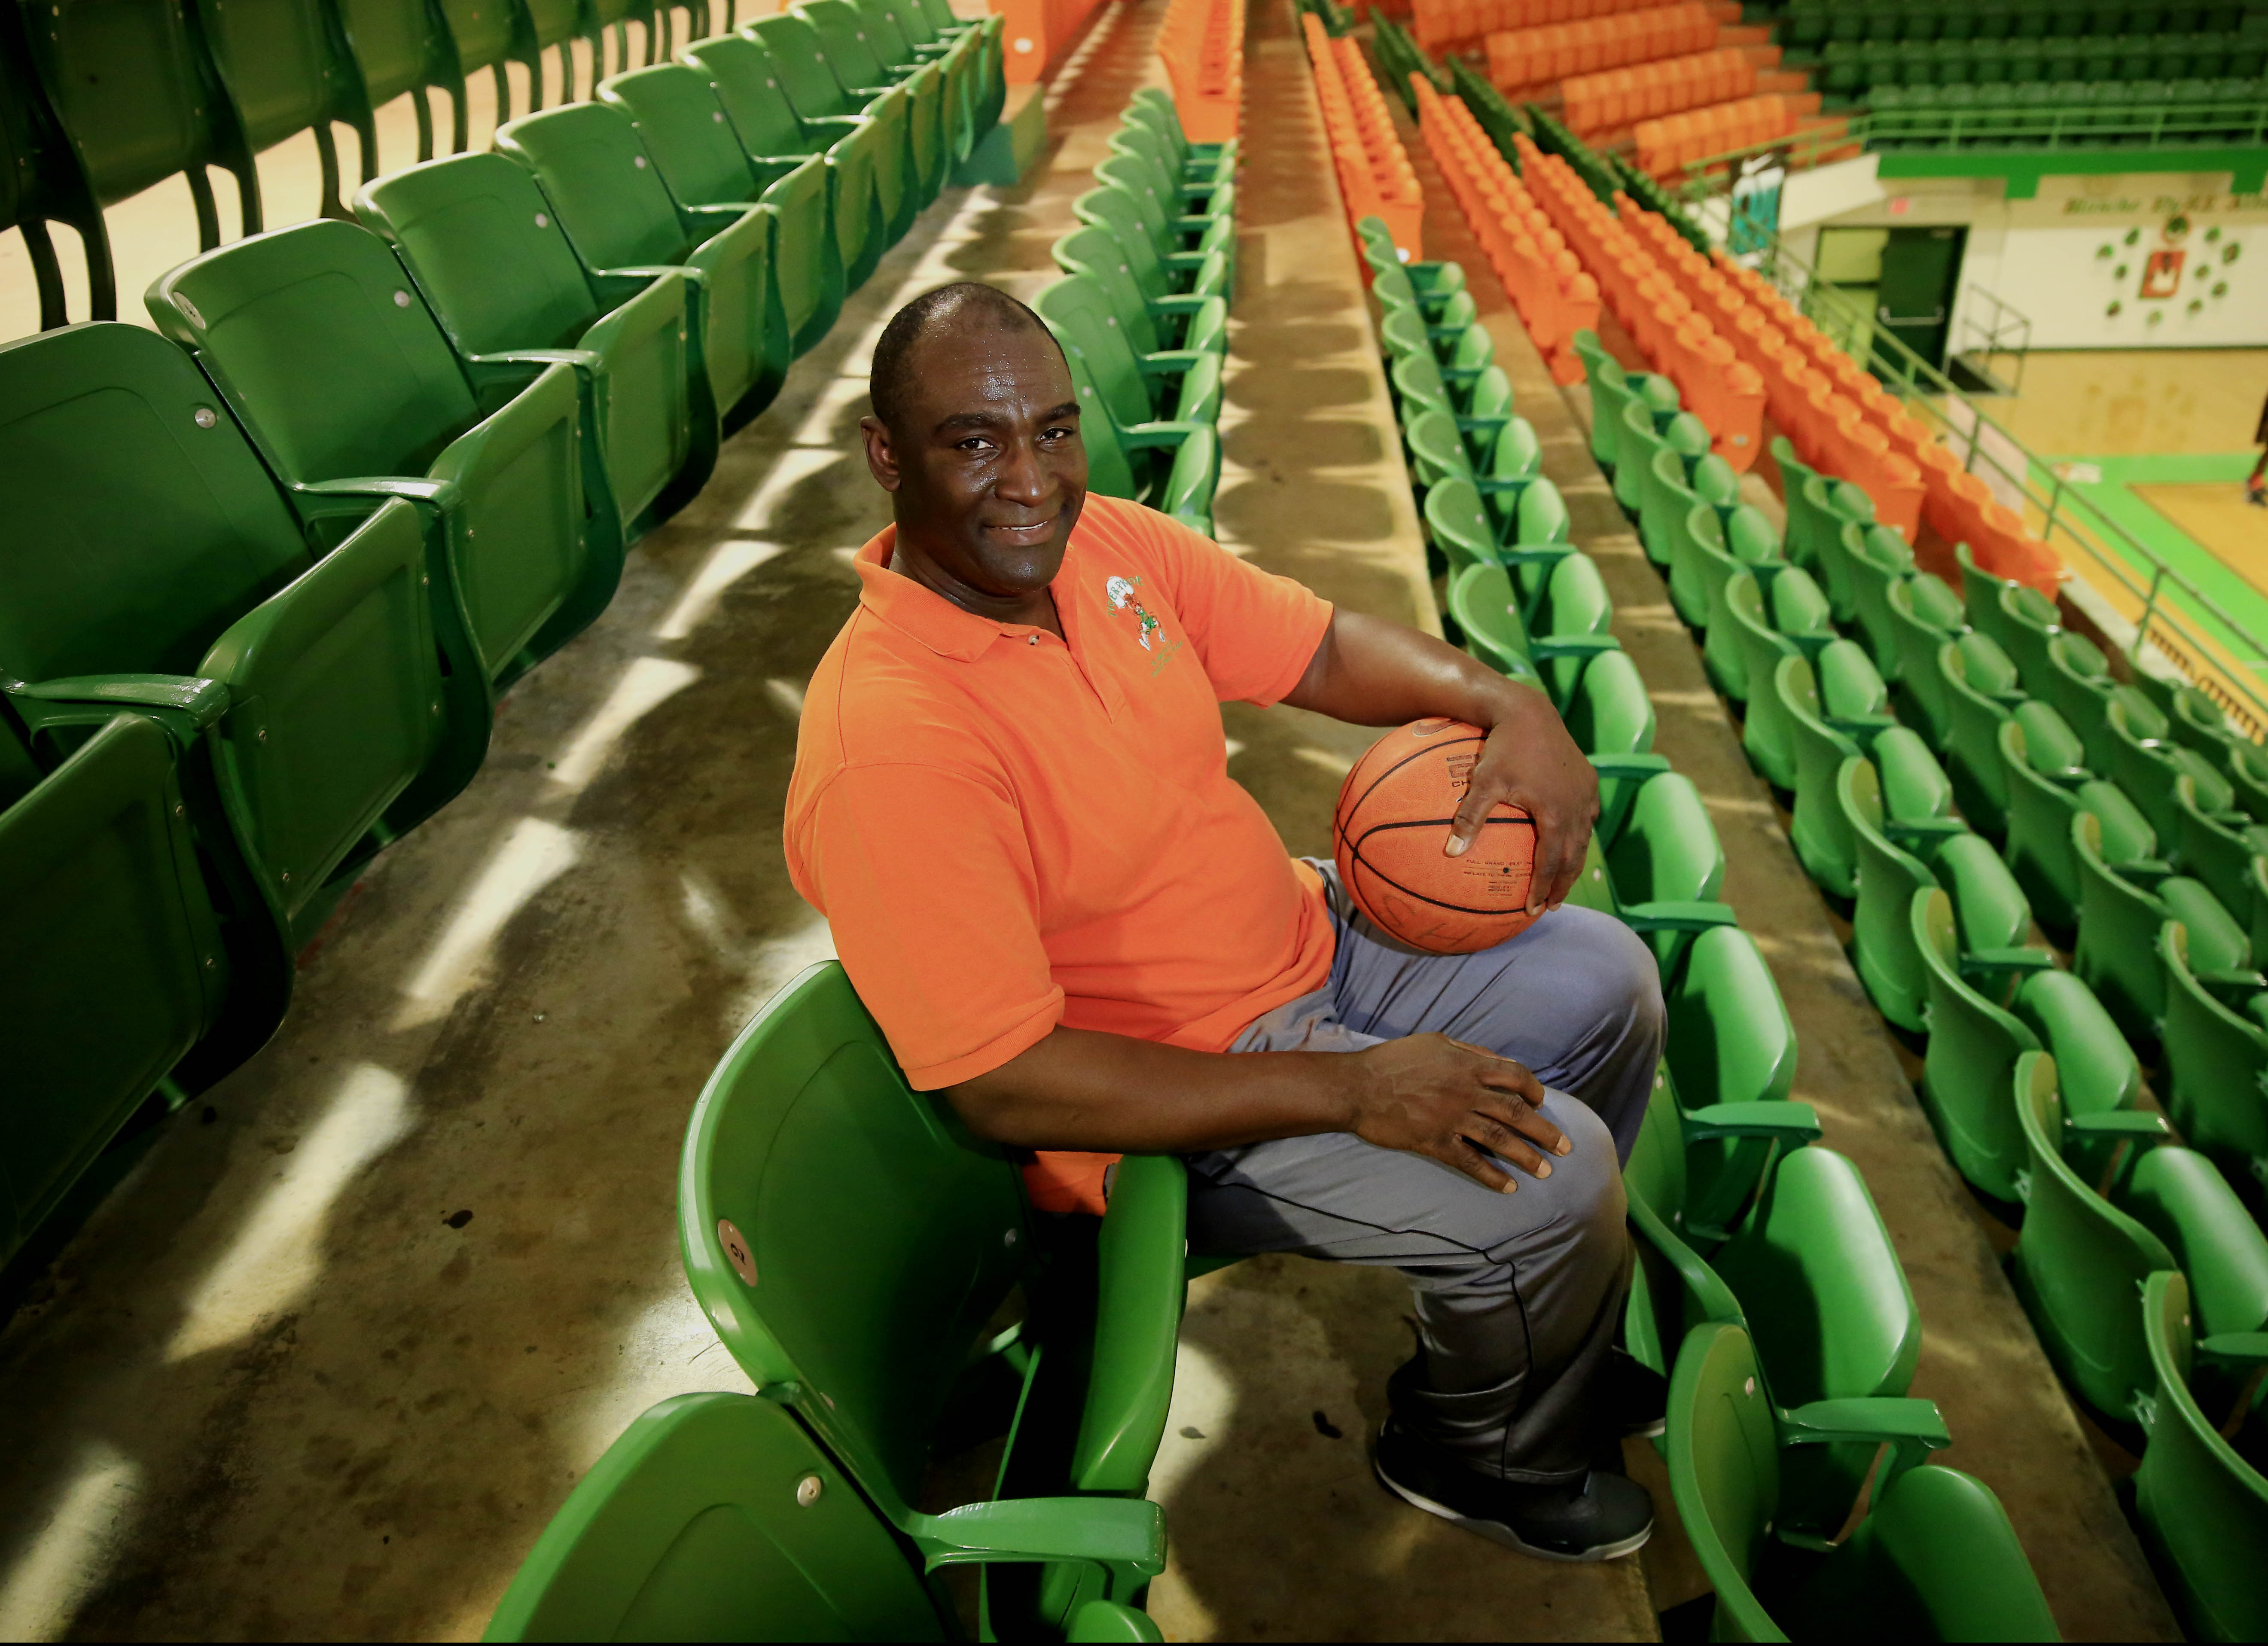 Melvin Randall of Blanche Ely in Florida is the ALL-USA Coach of the Year (Photo: USA TODAY Sports)